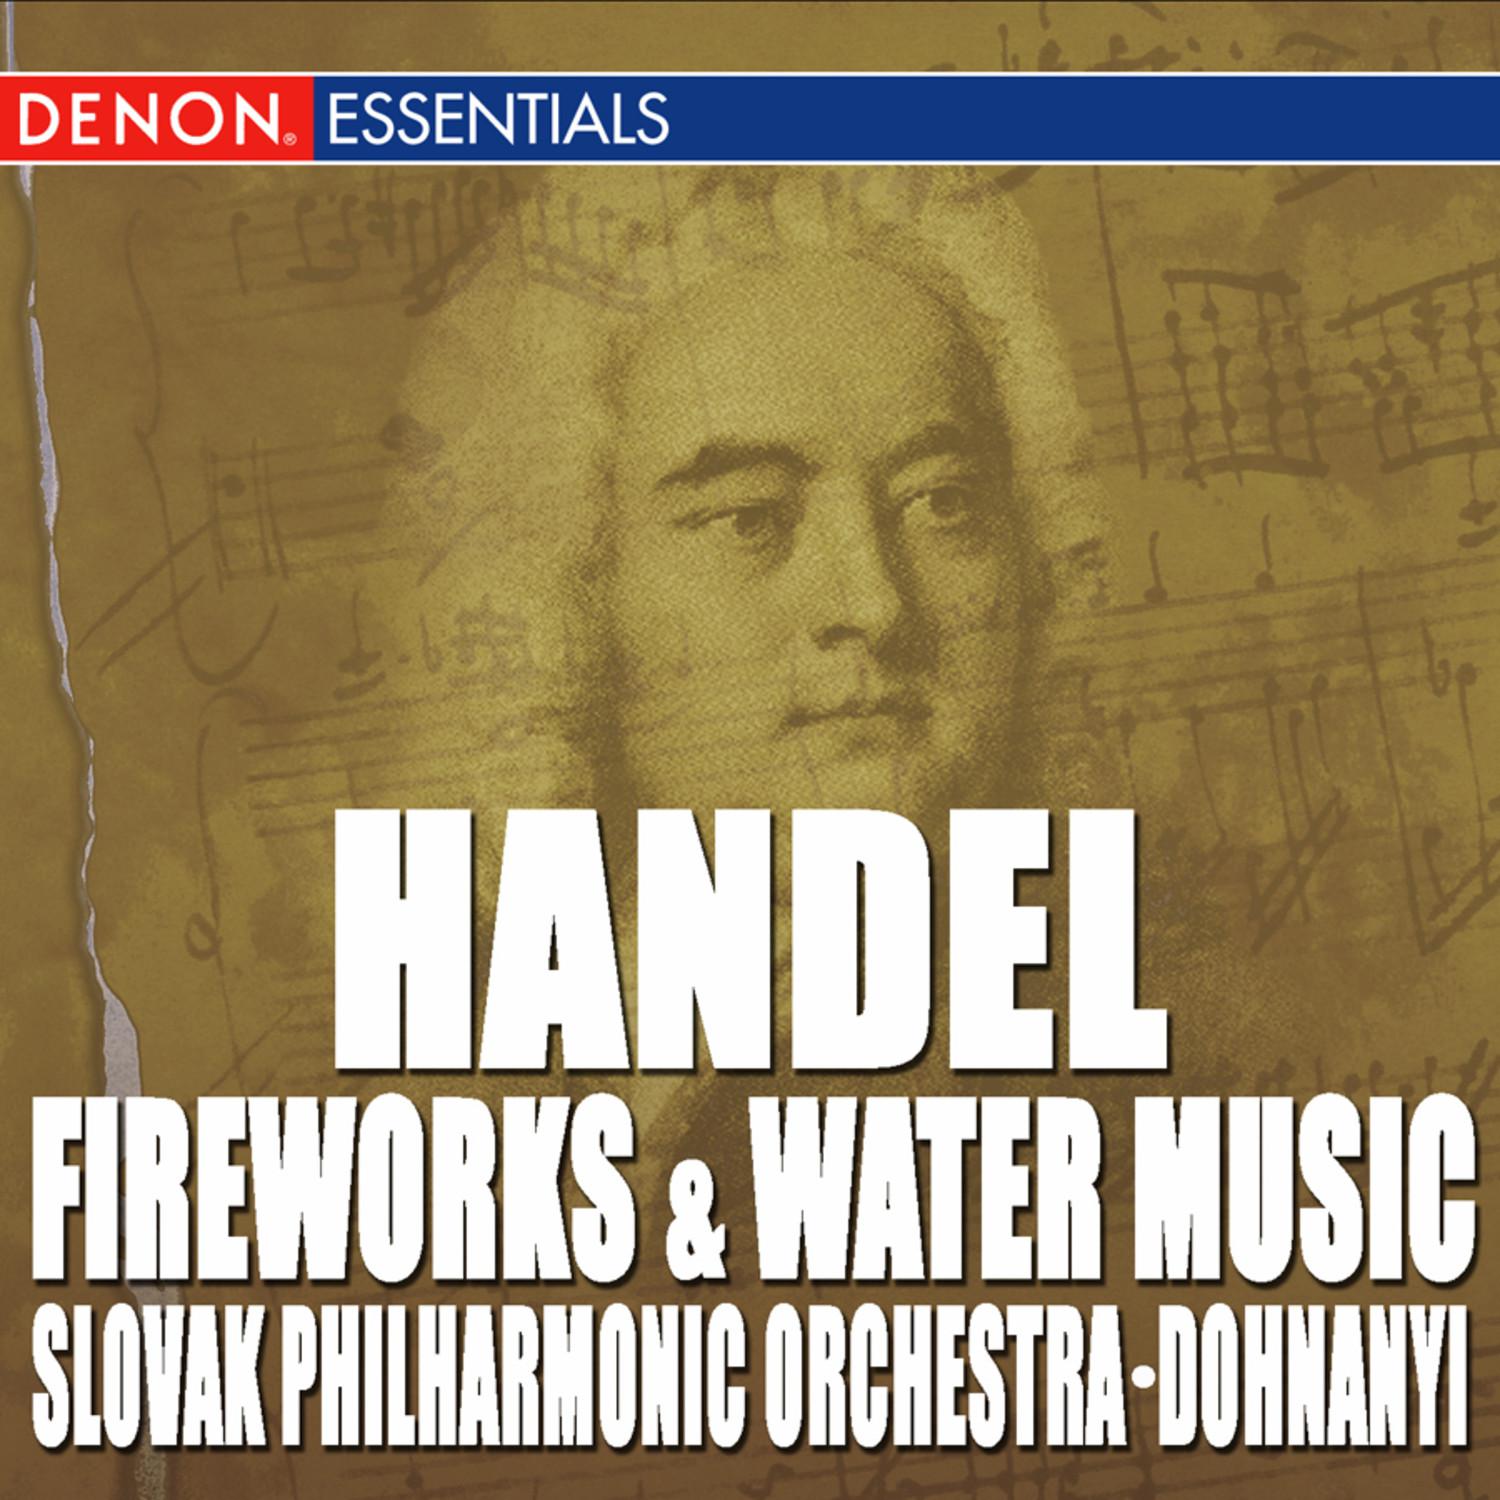 Water Music Suite No. 2 in D, HWV 349: VIII. Hornpipe